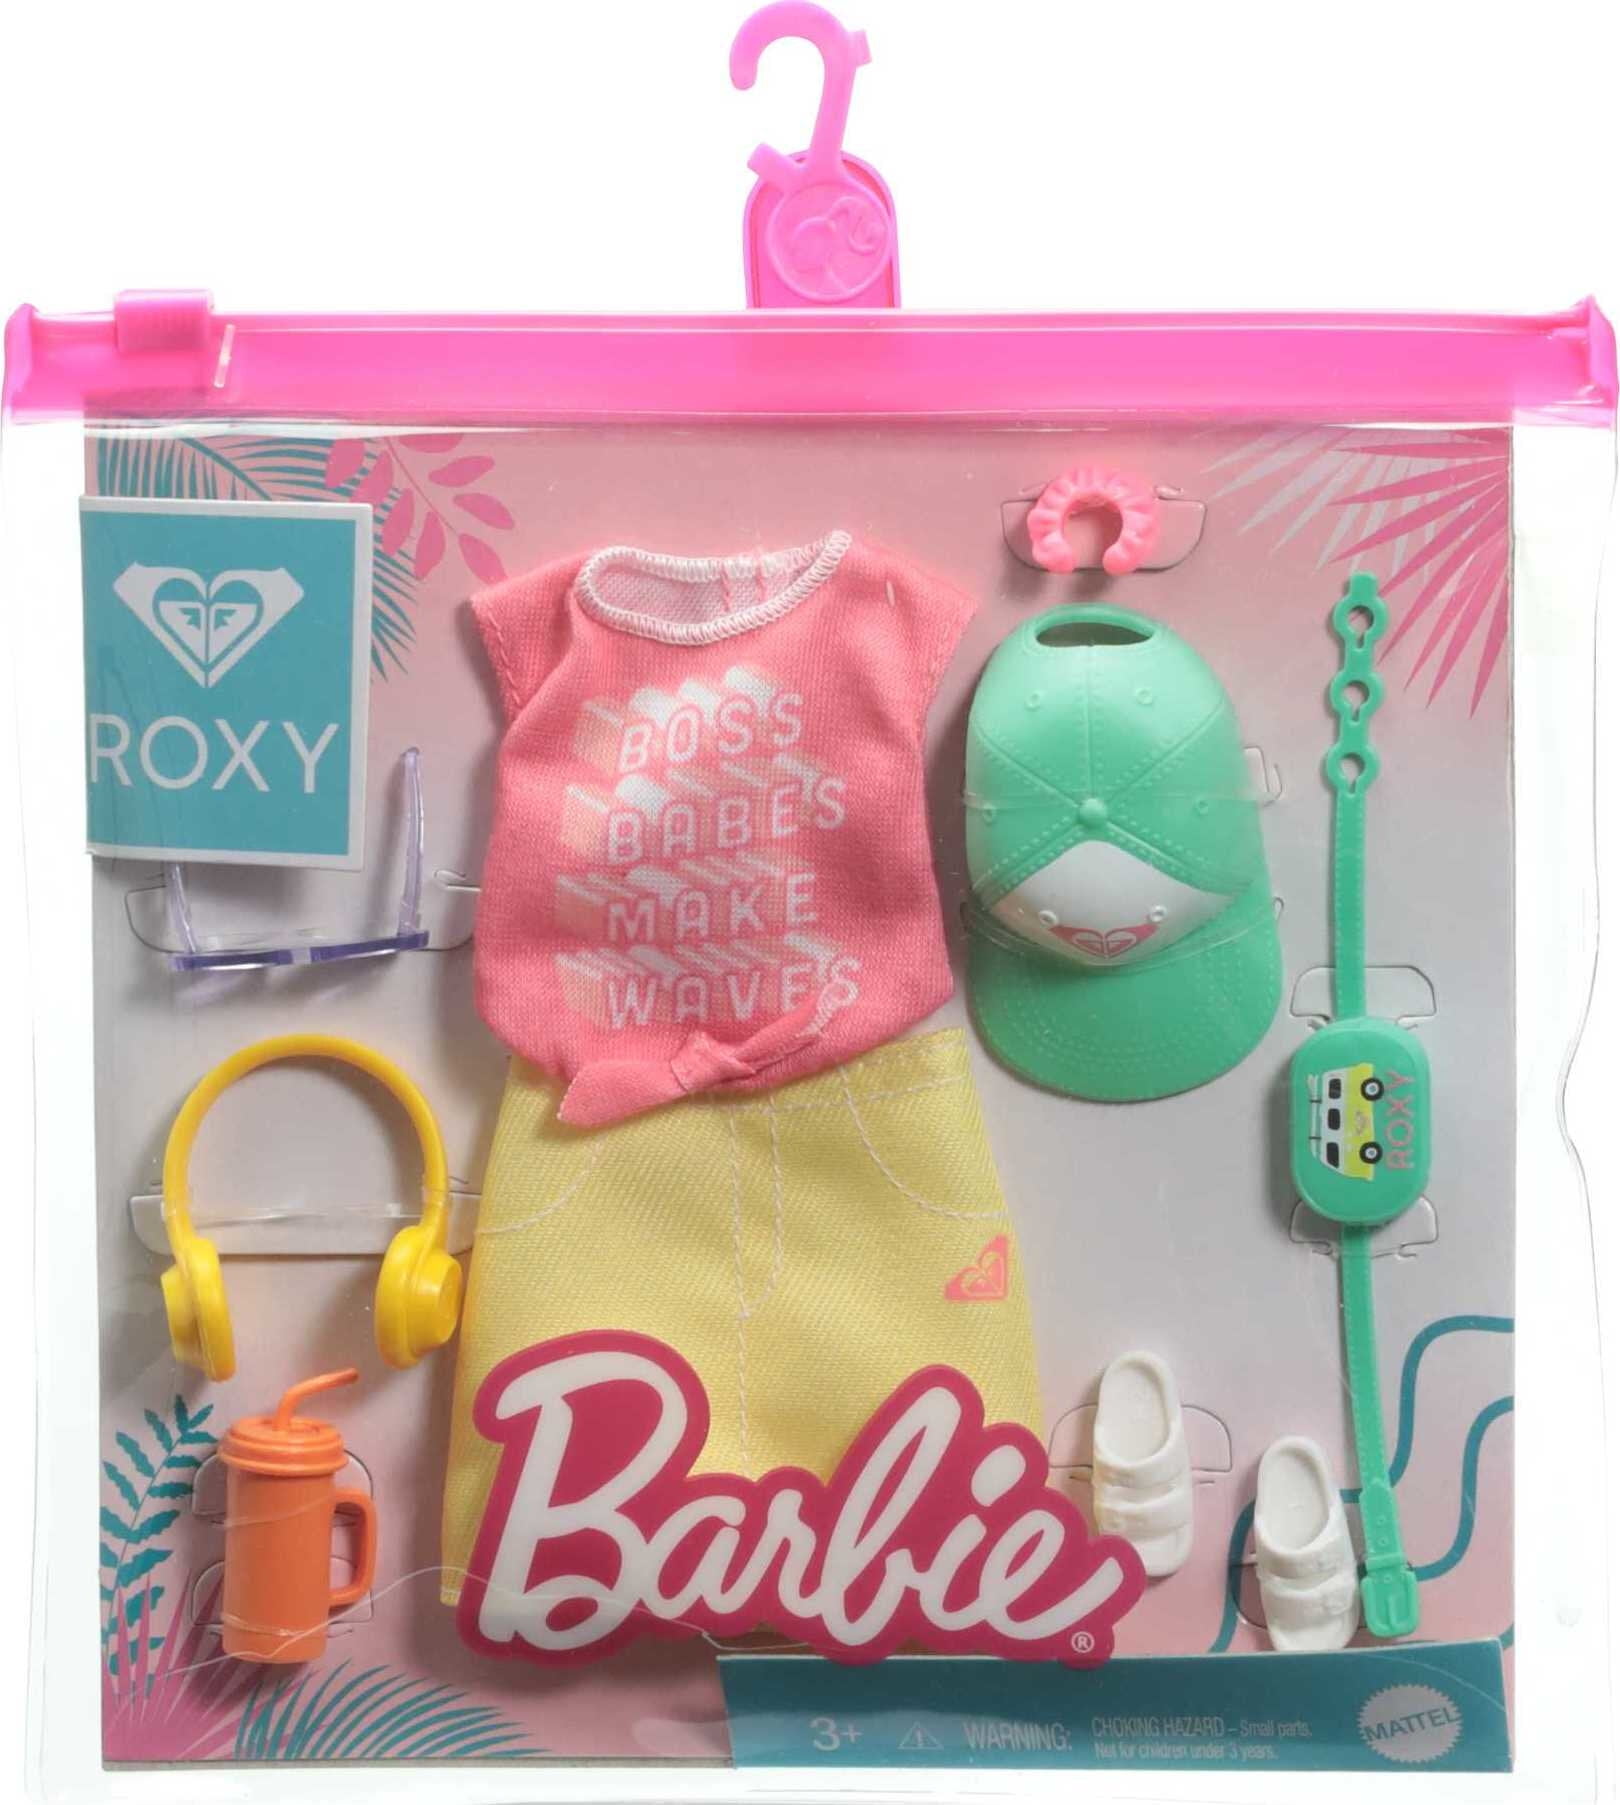 Elektrisk Perth Blackborough Korridor Barbie Storytelling Fashion Pack Of Doll Clothes Inspired By Roxy: Red  Graphic Top & Yellow Roxy Skirt with 7 Accessories for Barbie Dolls  Including Headphones, Gift for 3 To 8 Year Olds - Walmart.com